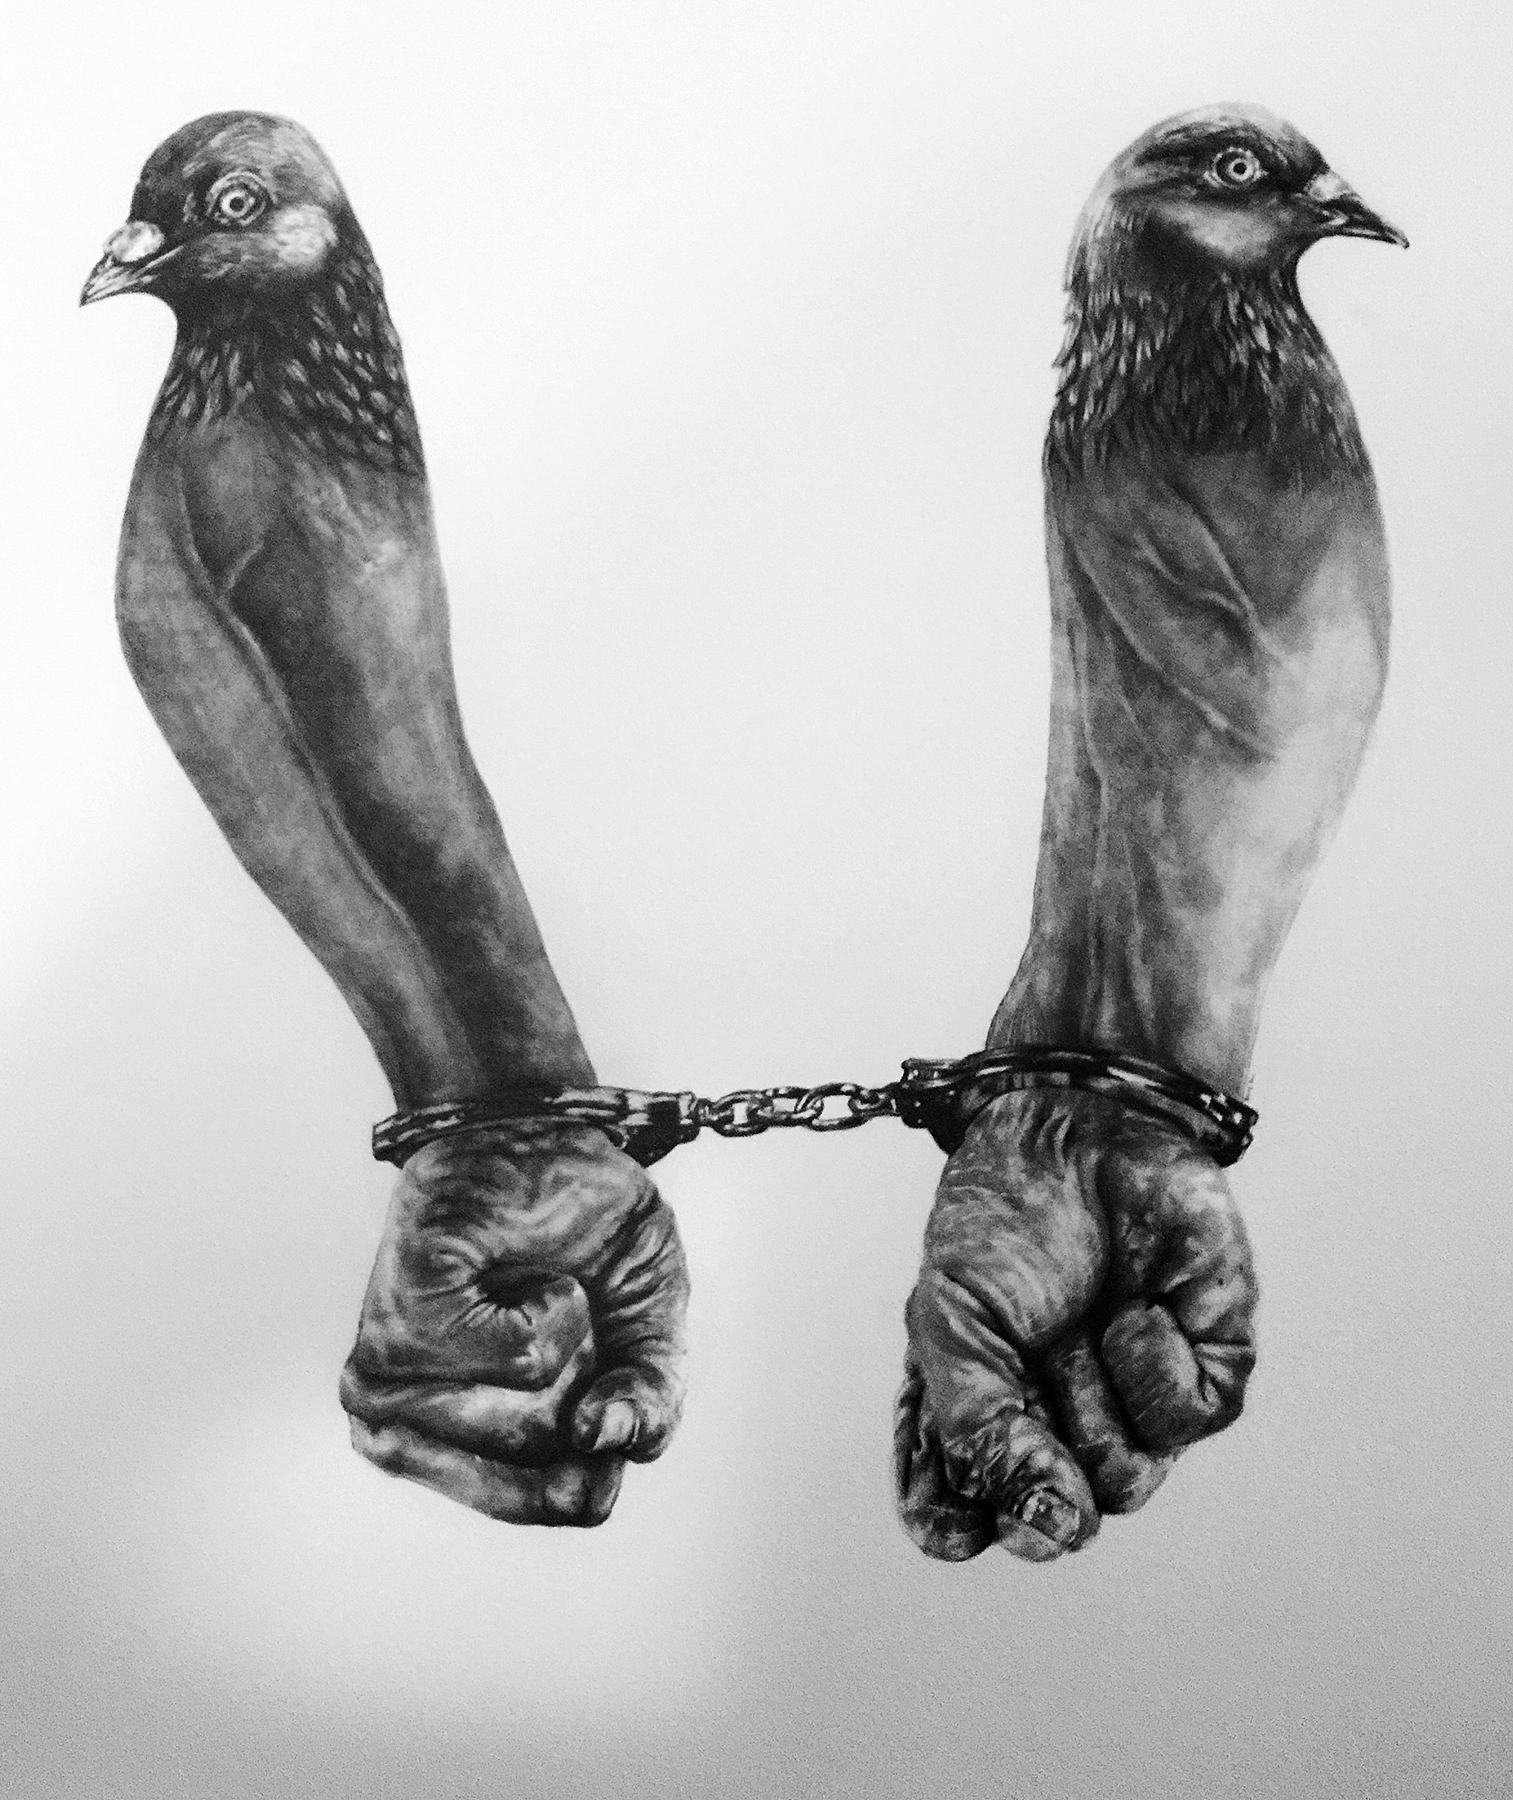  BACK TO YOUR COOP  30 X 22 graphite on paper 